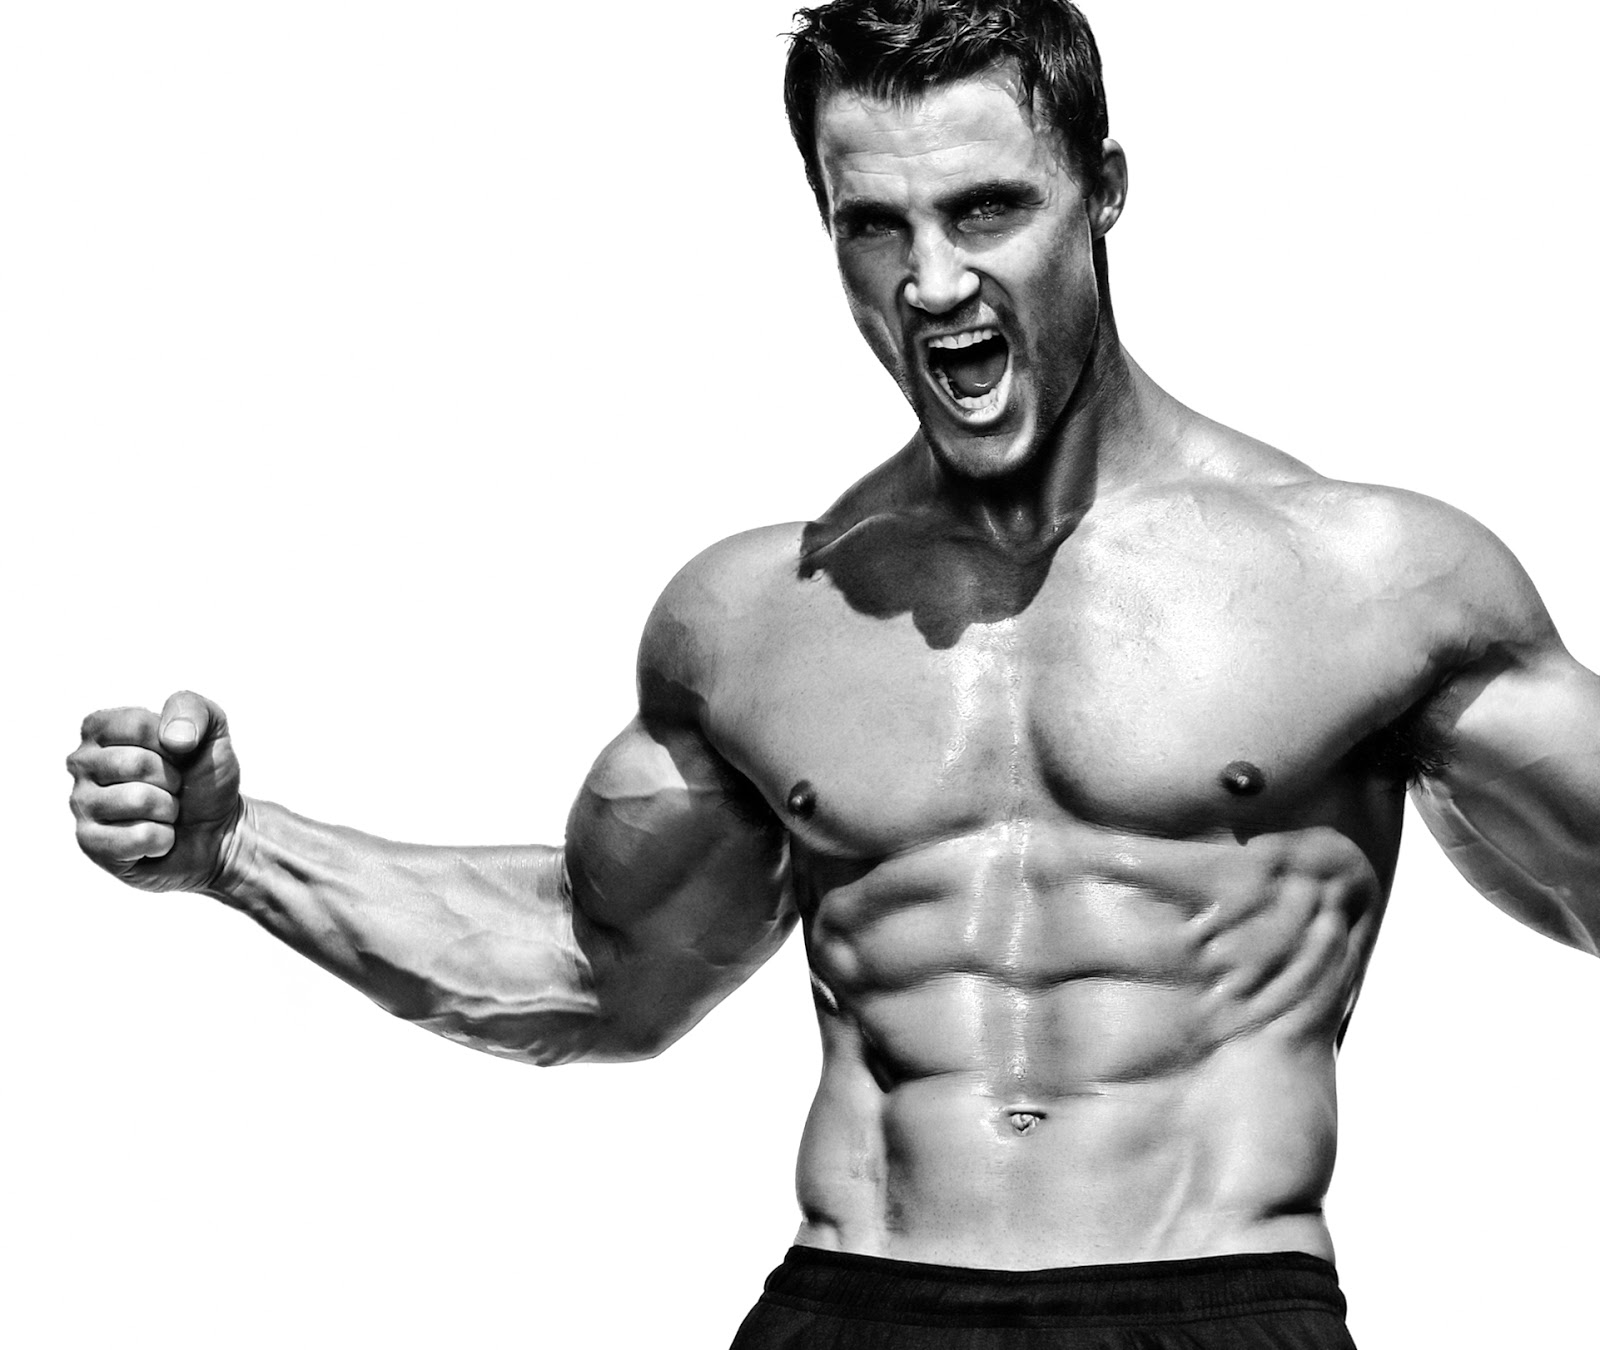  Star/Fitness Expert Greg Plitt Hit and Killed by Train While Filming